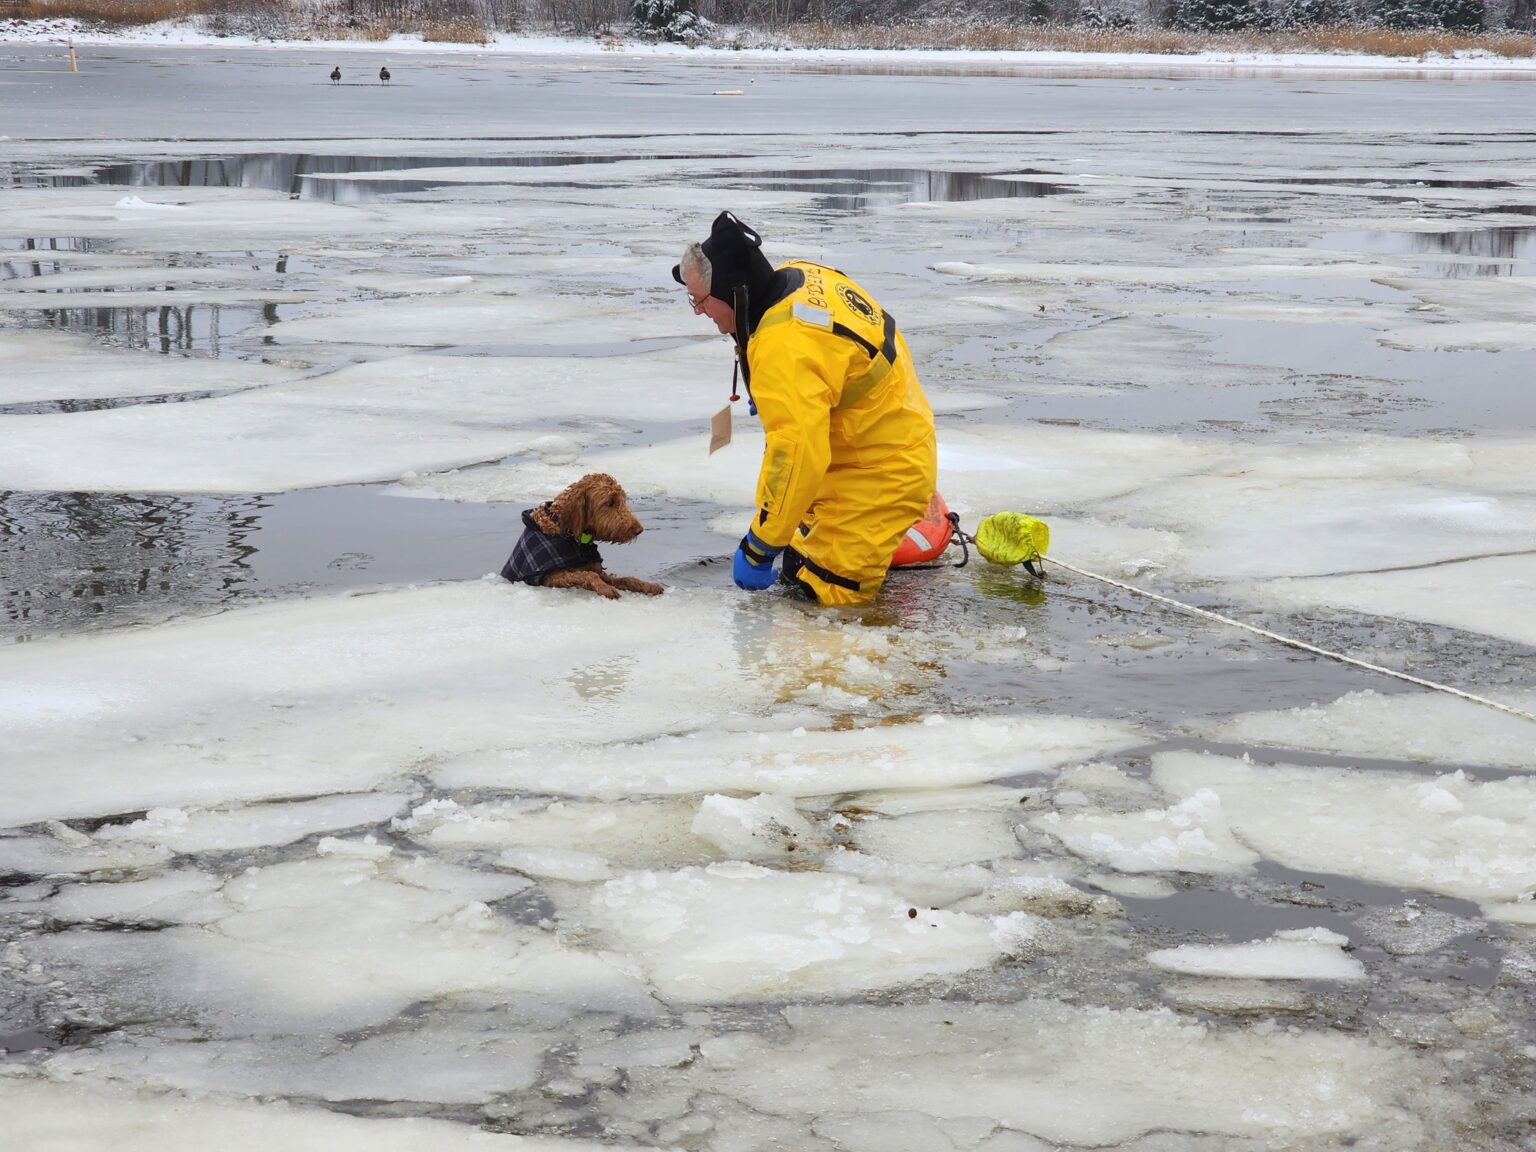 heartwarming moment as a dog is rescued from a frozen river in Braintree, Massachusetts, US.